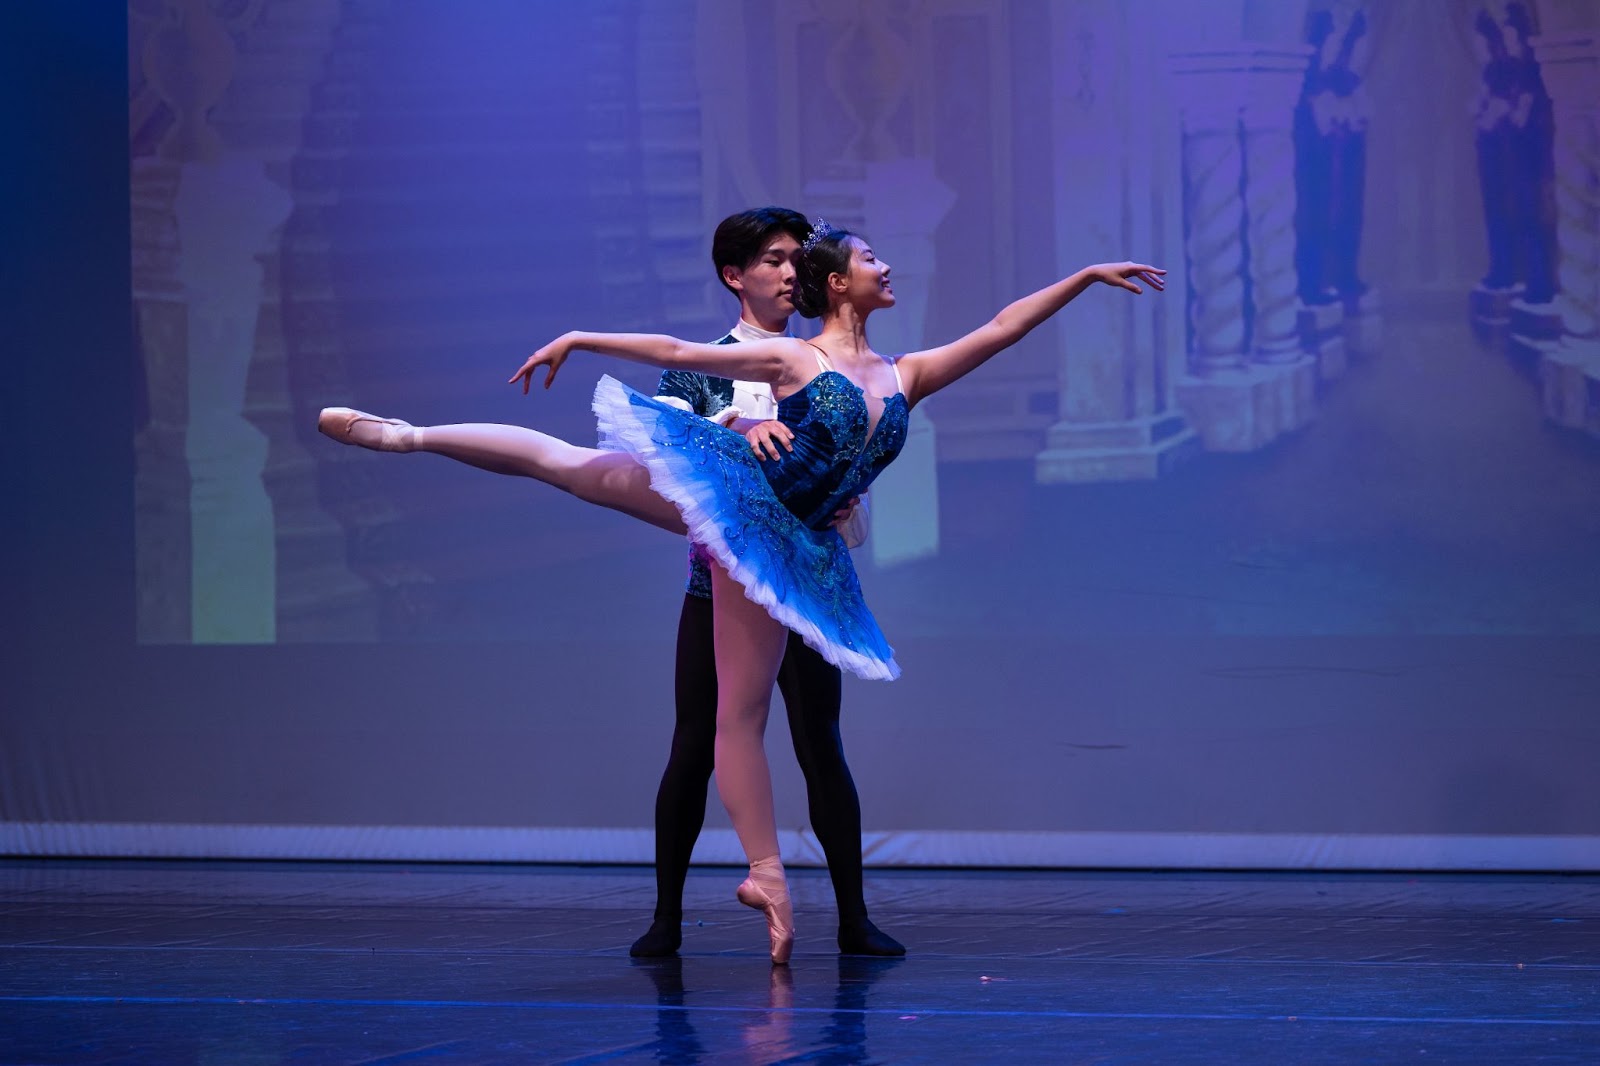 On stage, a male ballet dancer with black tights stands behind a female ballet dancer in a blue tutu. The female dancer stands on the toes of a single foot, with her hands gracefully outstretched forward and backward and her other leg straight horizontal.